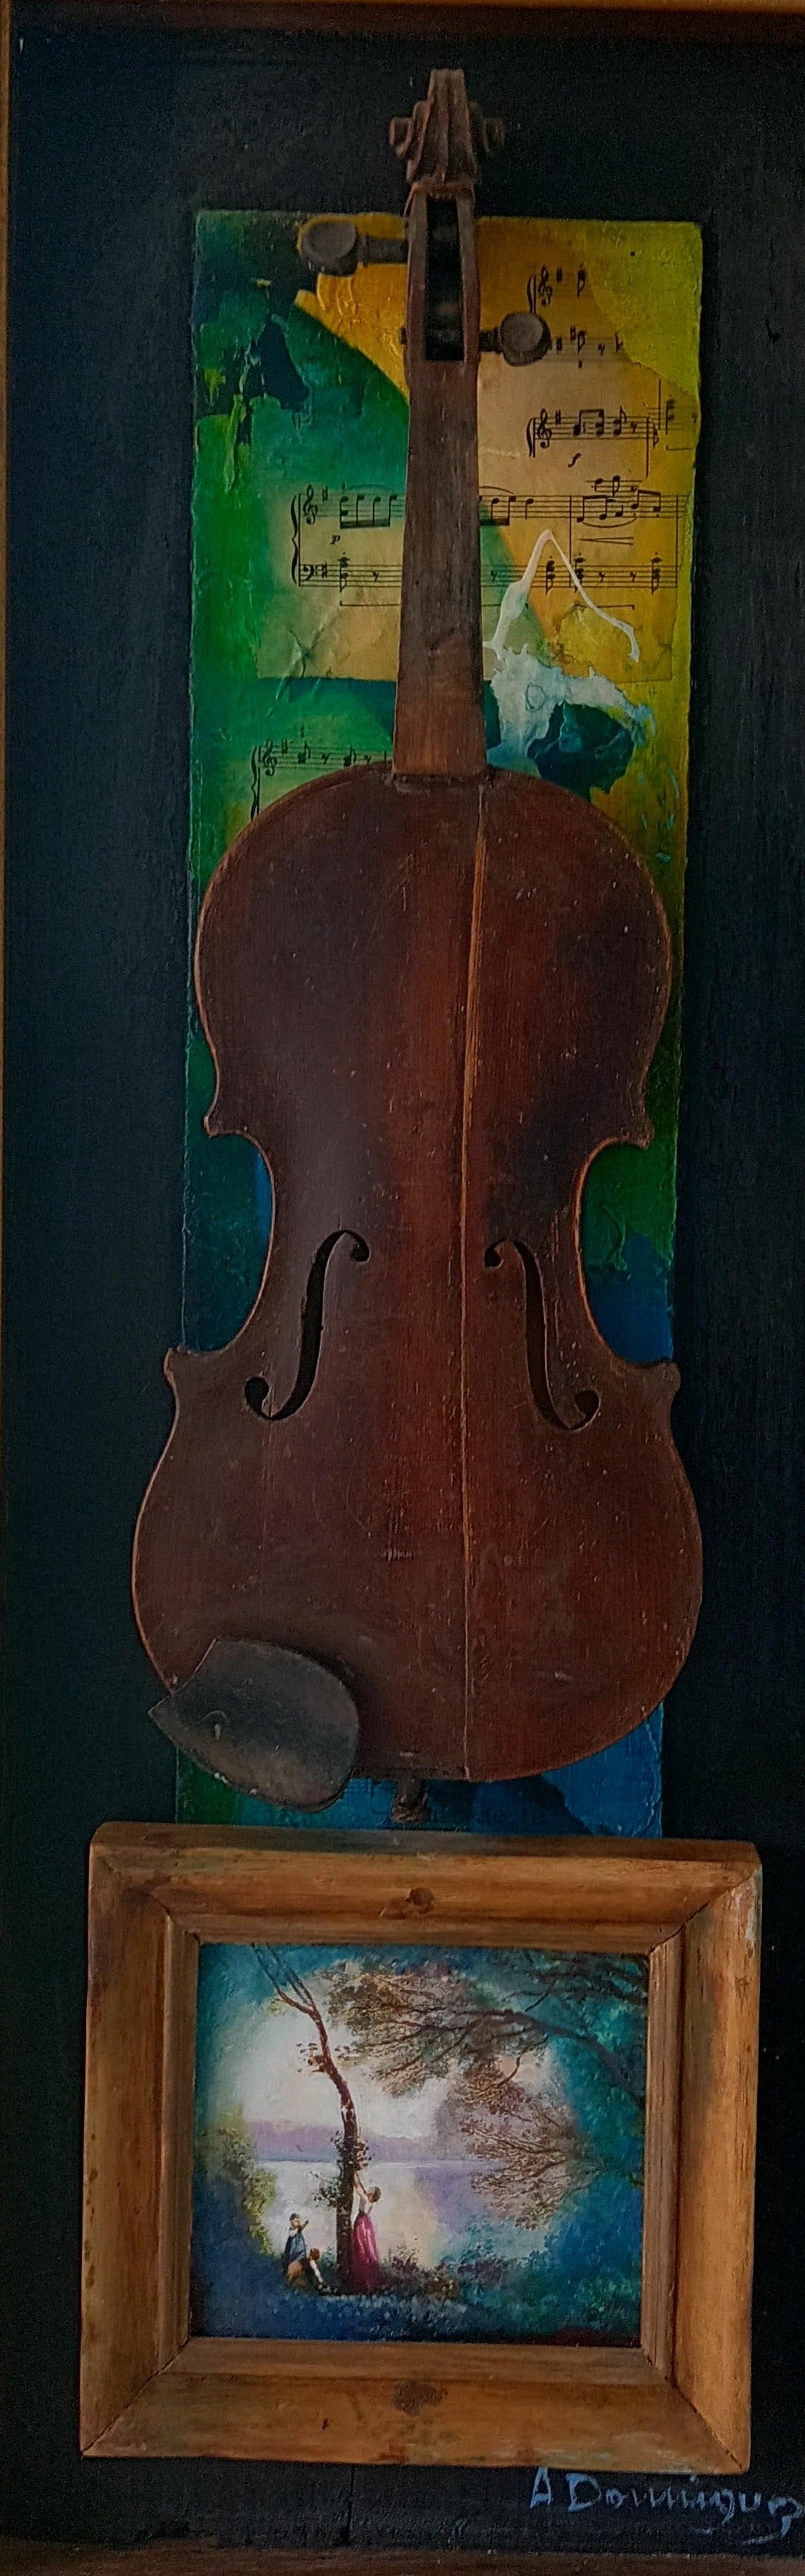 Violin with Oil Painting - Old Melody - Oil on Wood - Violin - Painting - KMNK Deco 